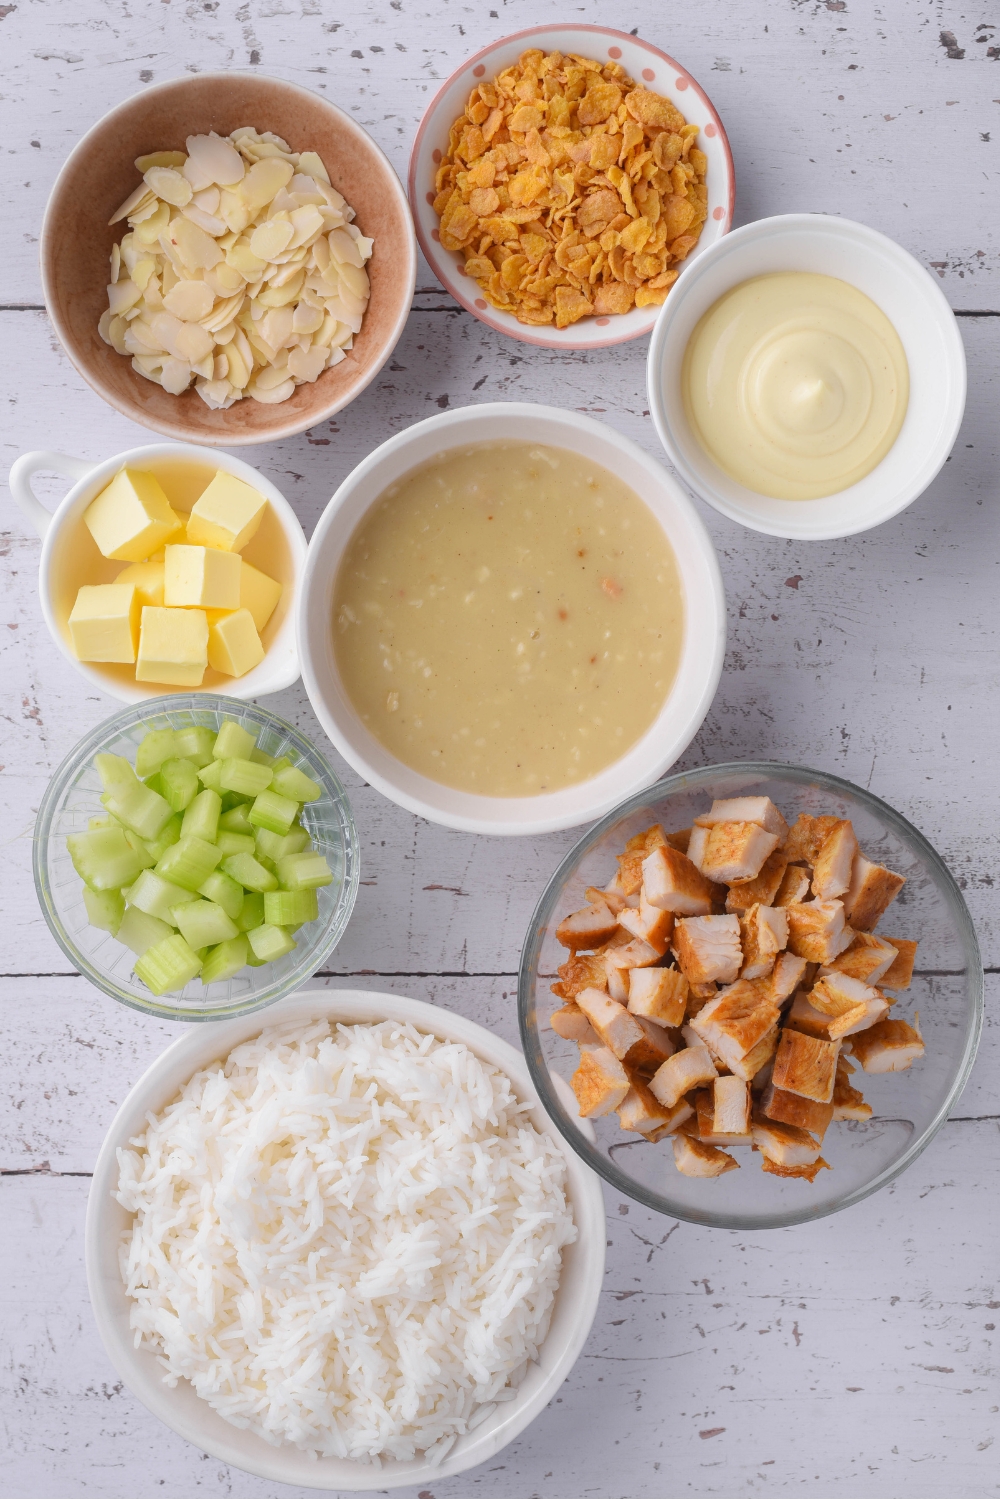 Overhead view of an assortment of ingredients including bowls of cornflakes, chopped chicken, white rice, mayonnaise, slivered almonds, condensed chicken soup, and butter cubes.